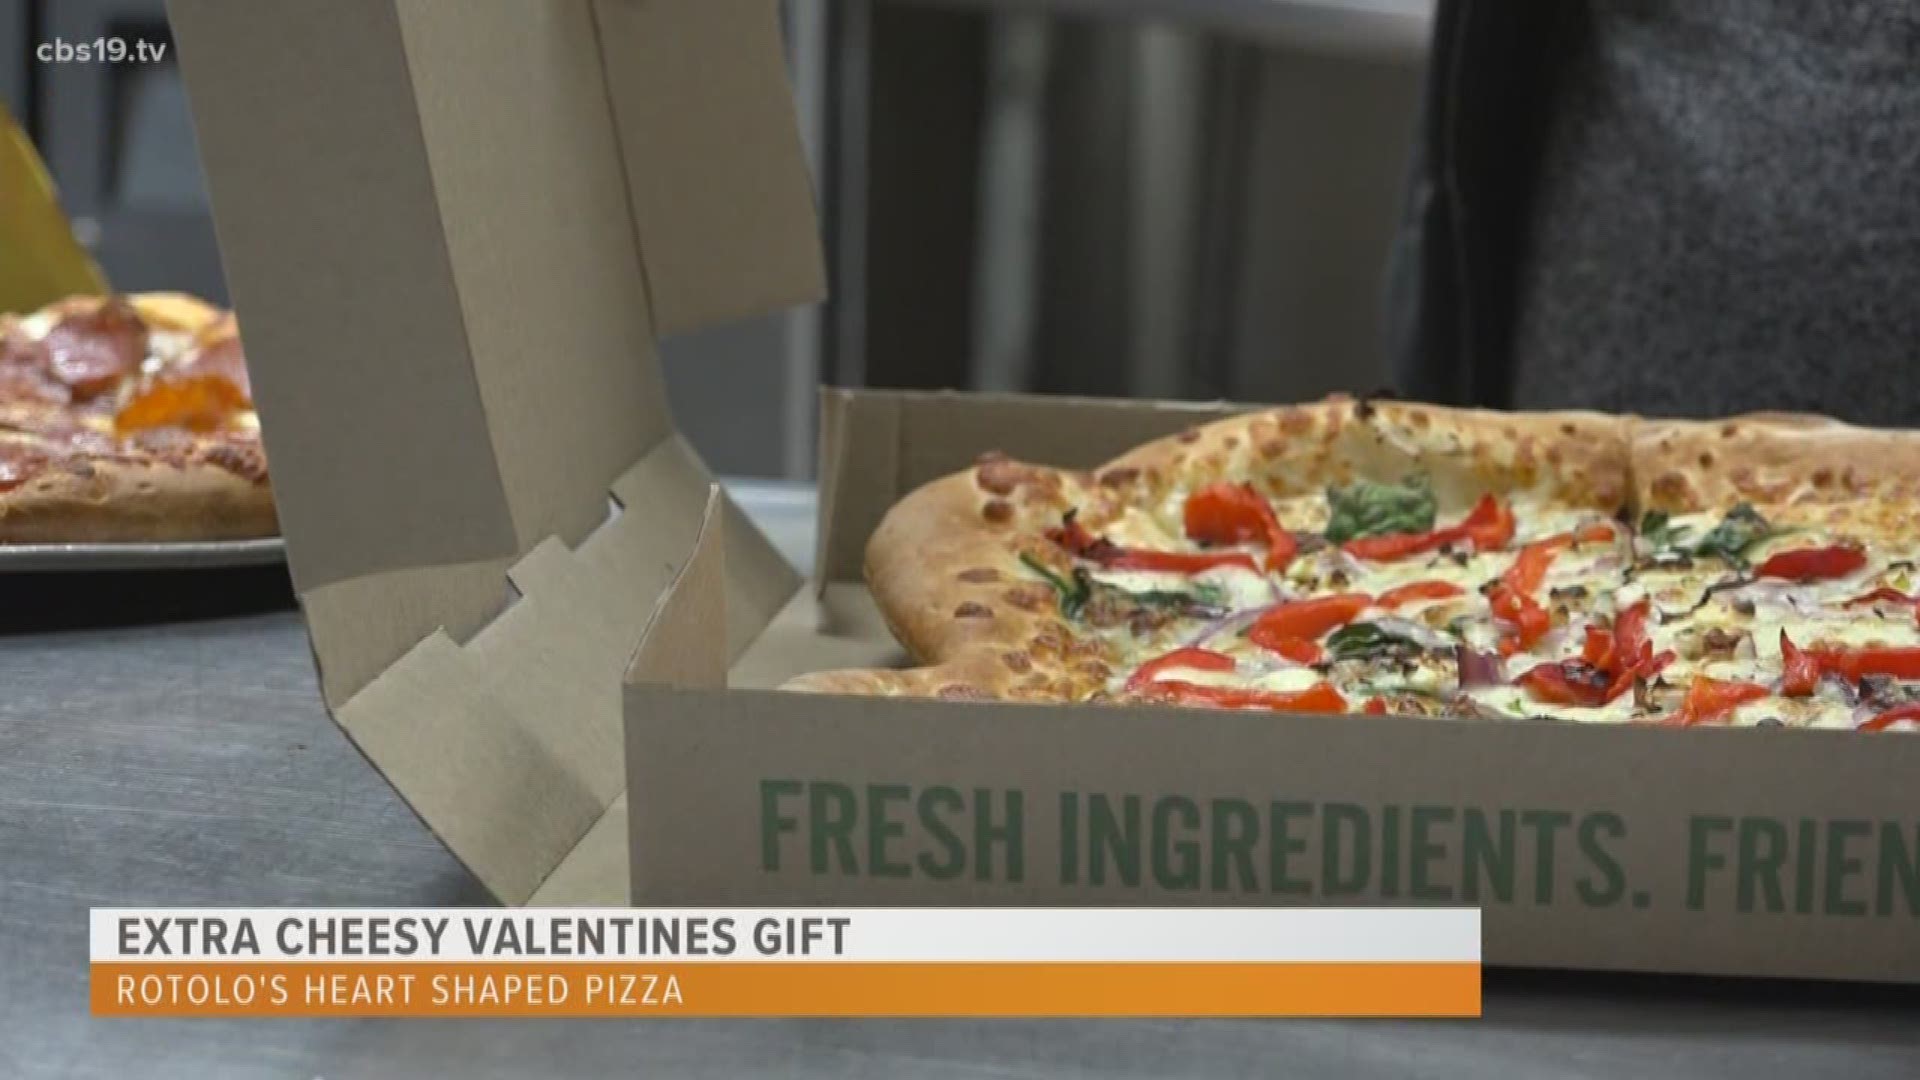 Rotolo's is taking the holiday season to heart and selling heart shaped pizza pies!